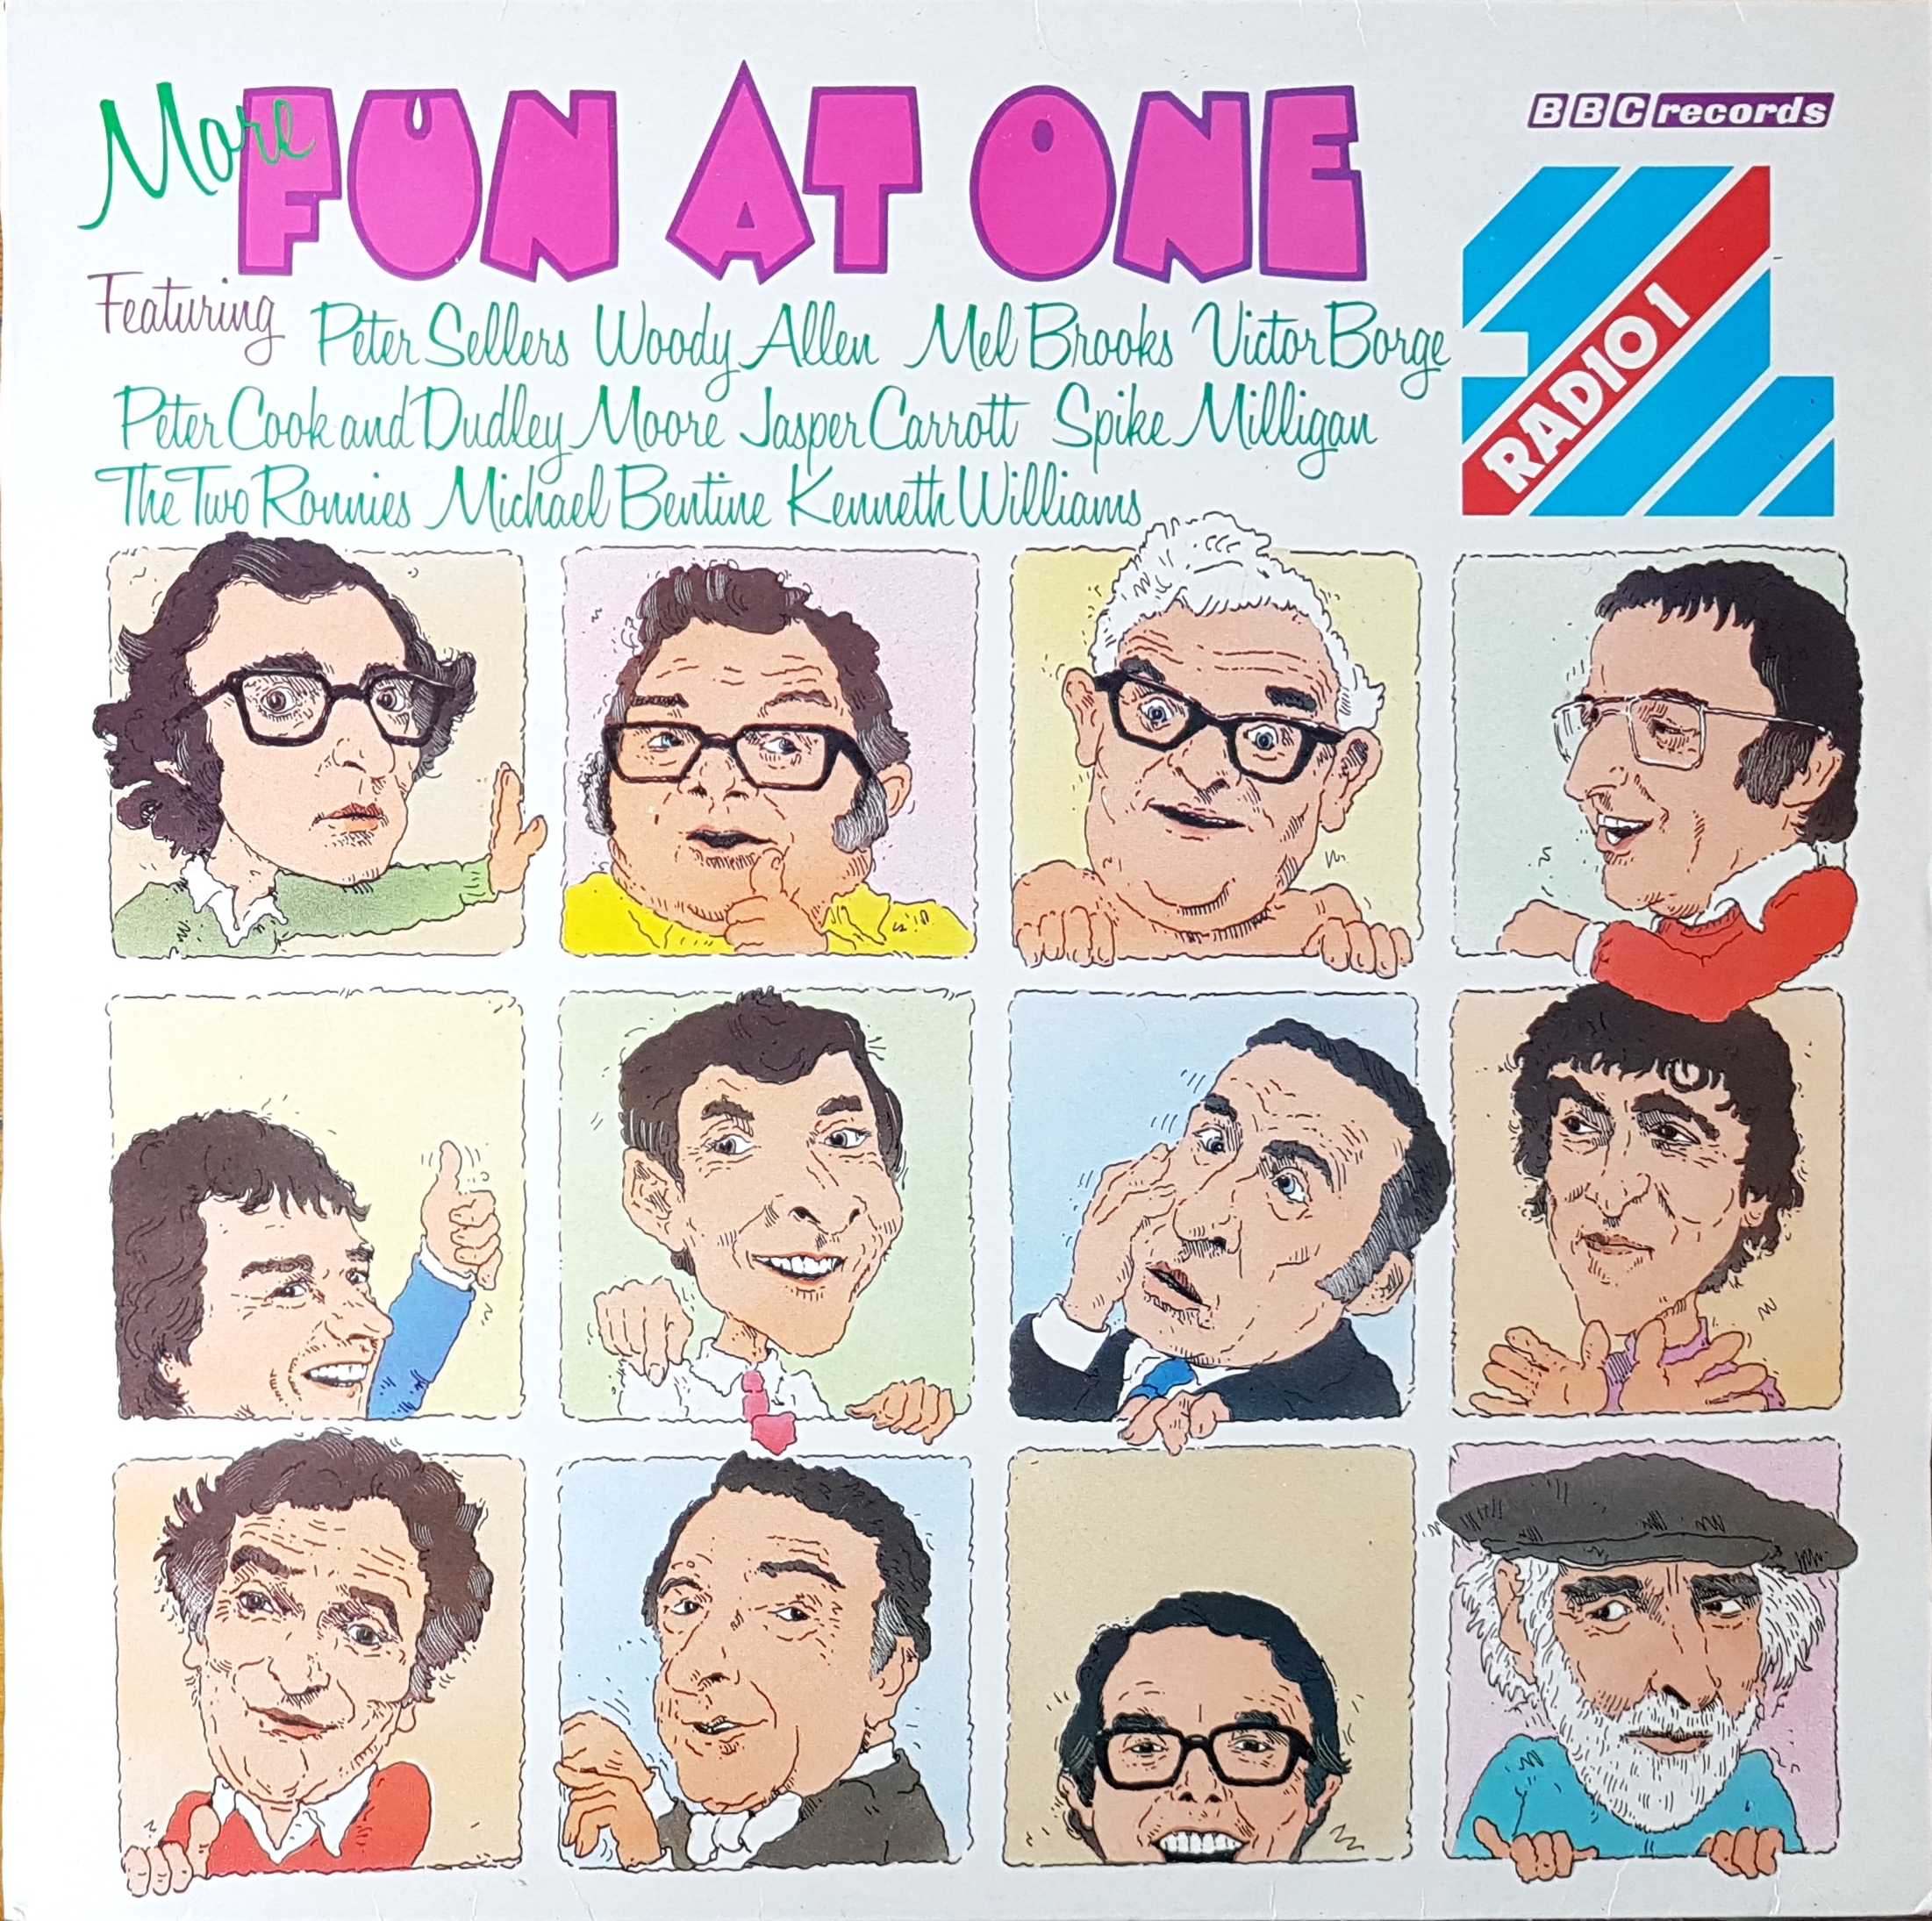 Picture of REB 399 More fun at one by artist Various from the BBC albums - Records and Tapes library